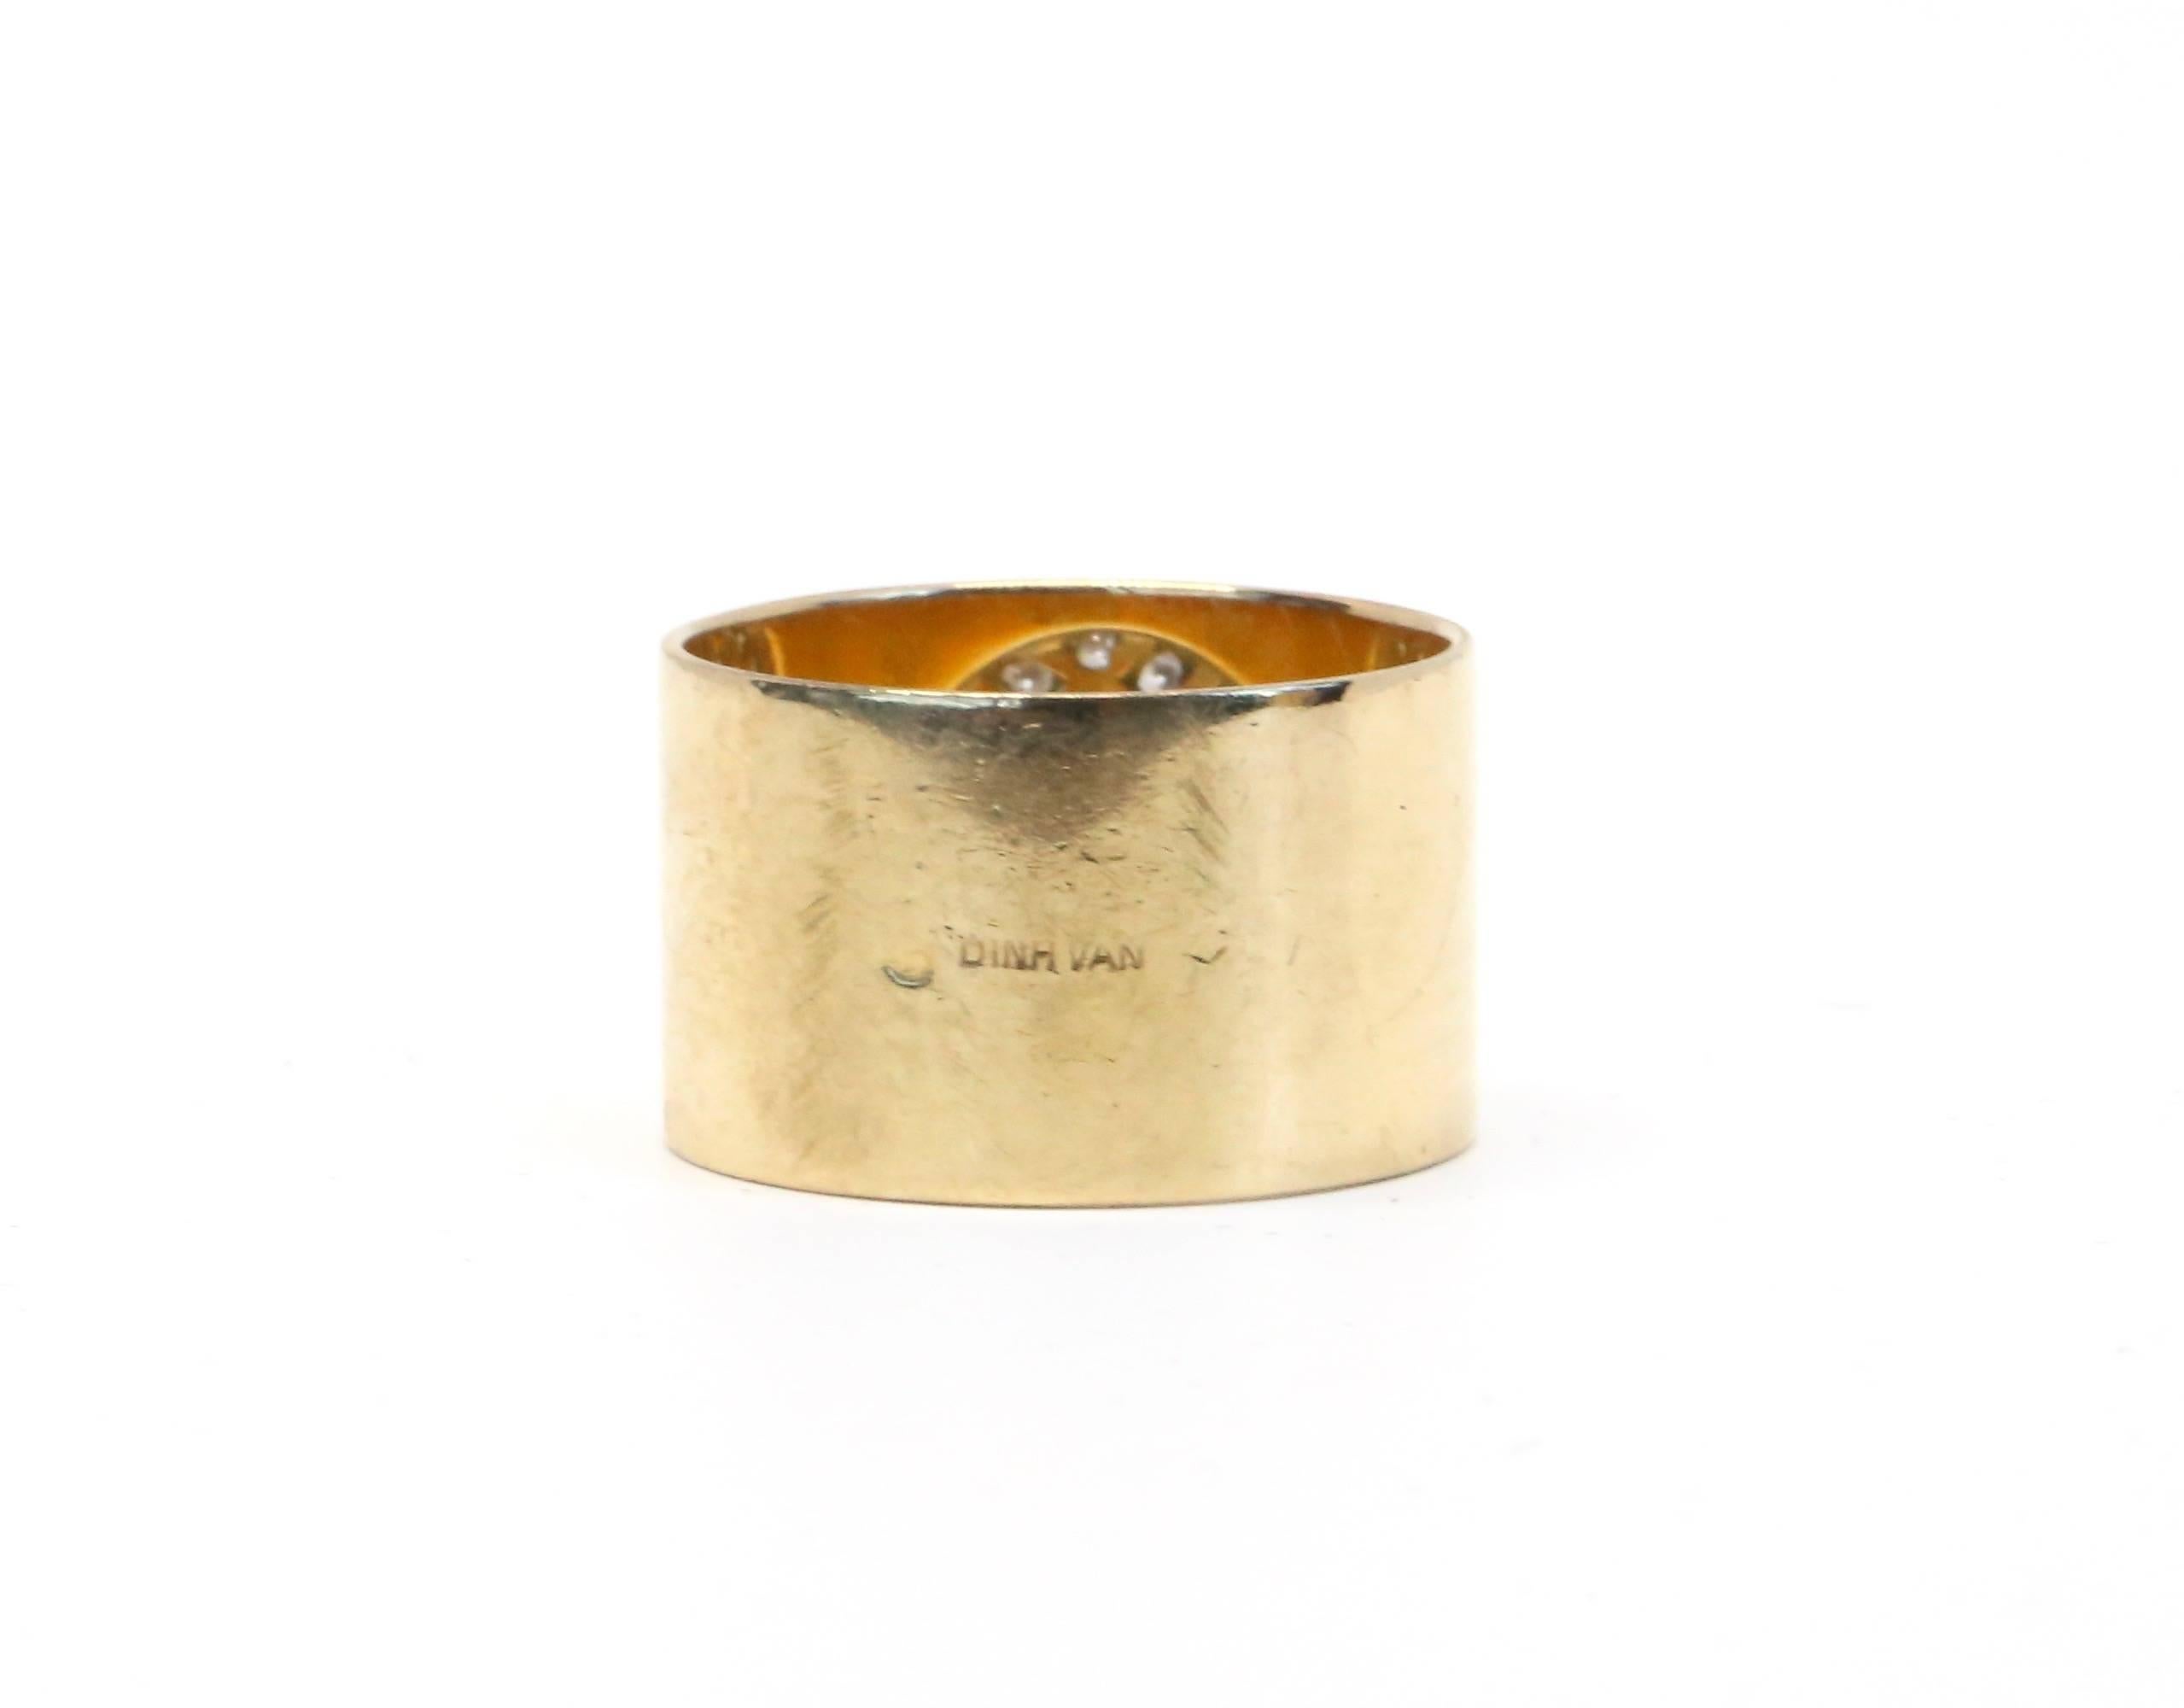 Very early example of the' Anthéa' ring in 18k yellow gold with 23 diamonds designed by Jean Dinh Van dating to the 1970's. Center of ring falls at an American size 7 however due to the thickness of the band (11mm), this ring best fits a size 5.75